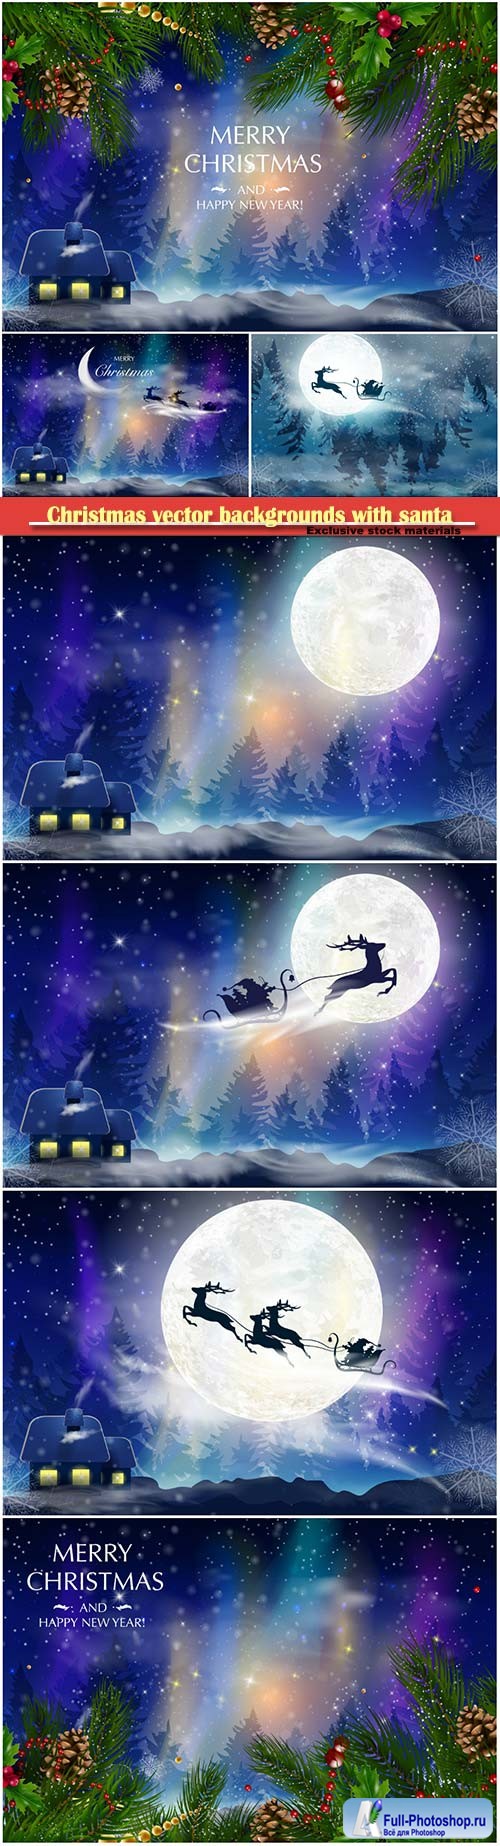 Christmas vector backgrounds with santa and deer flying through the sky